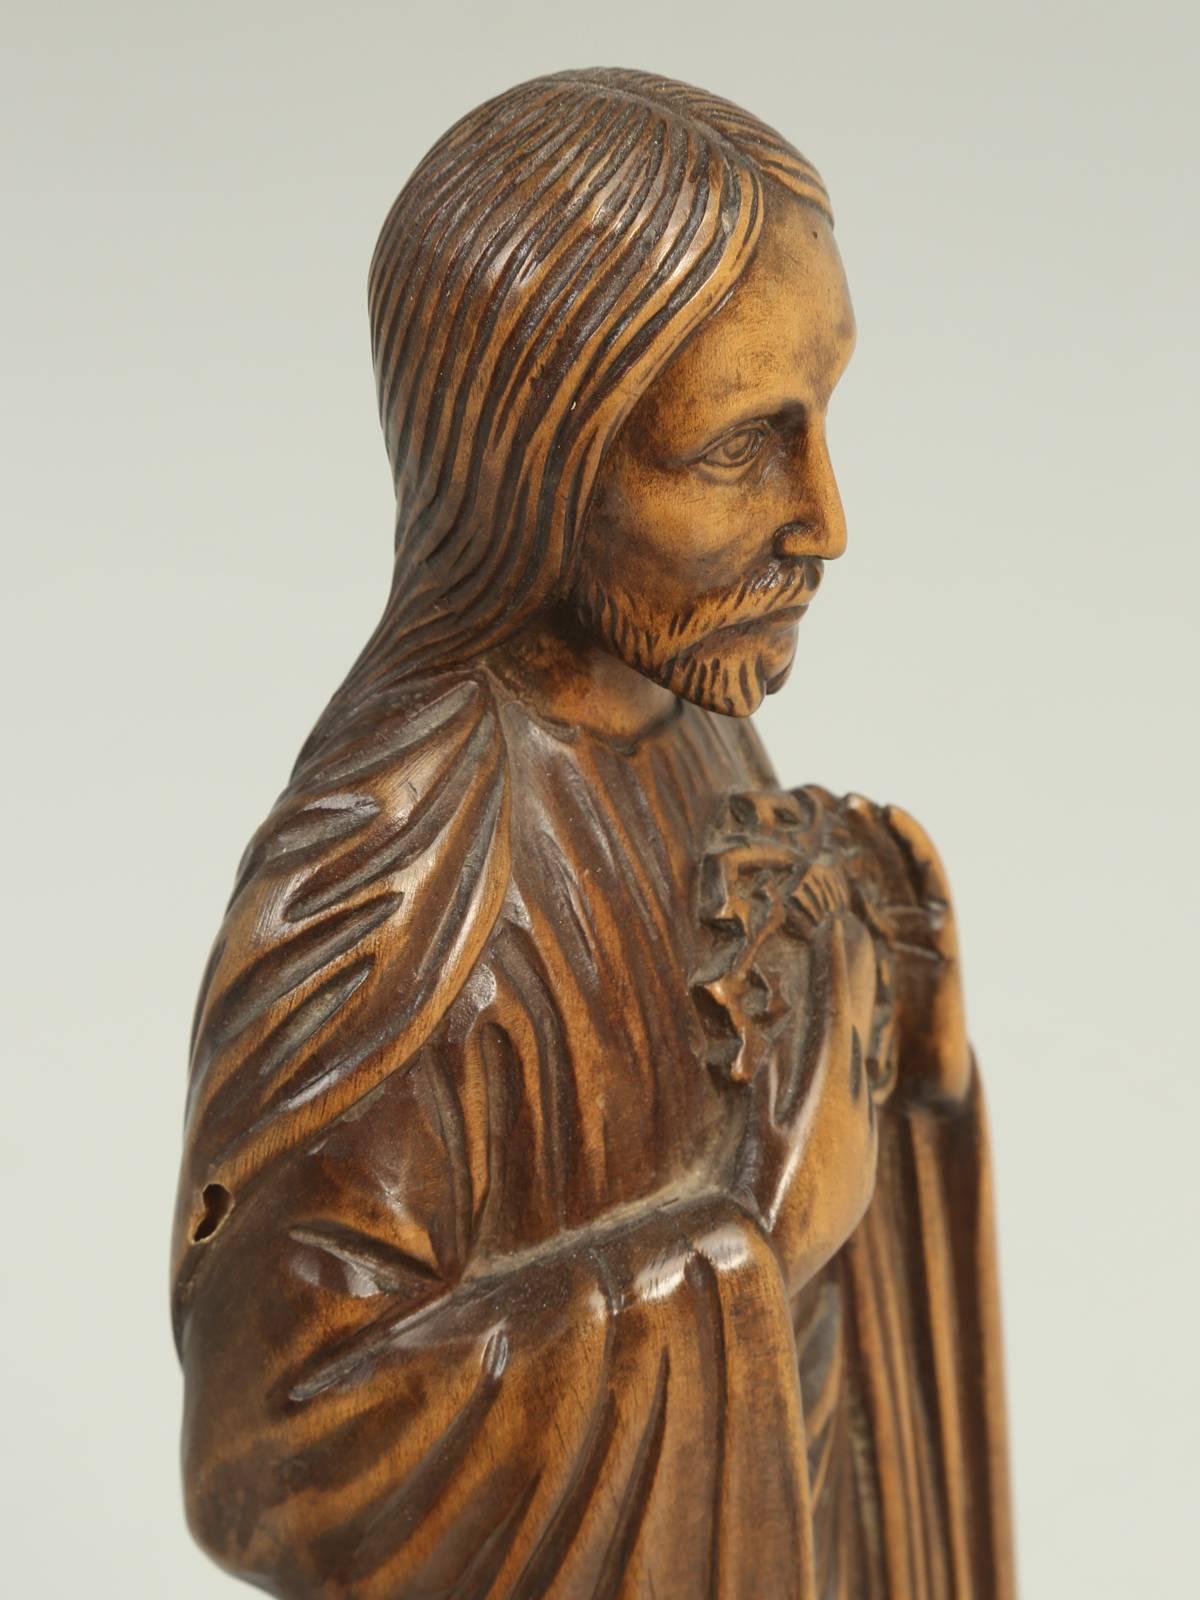 Beautifully carved from wood, is a sculpture of Jesus, signed R. Vergnes, dated 1949.
Signed and dated.